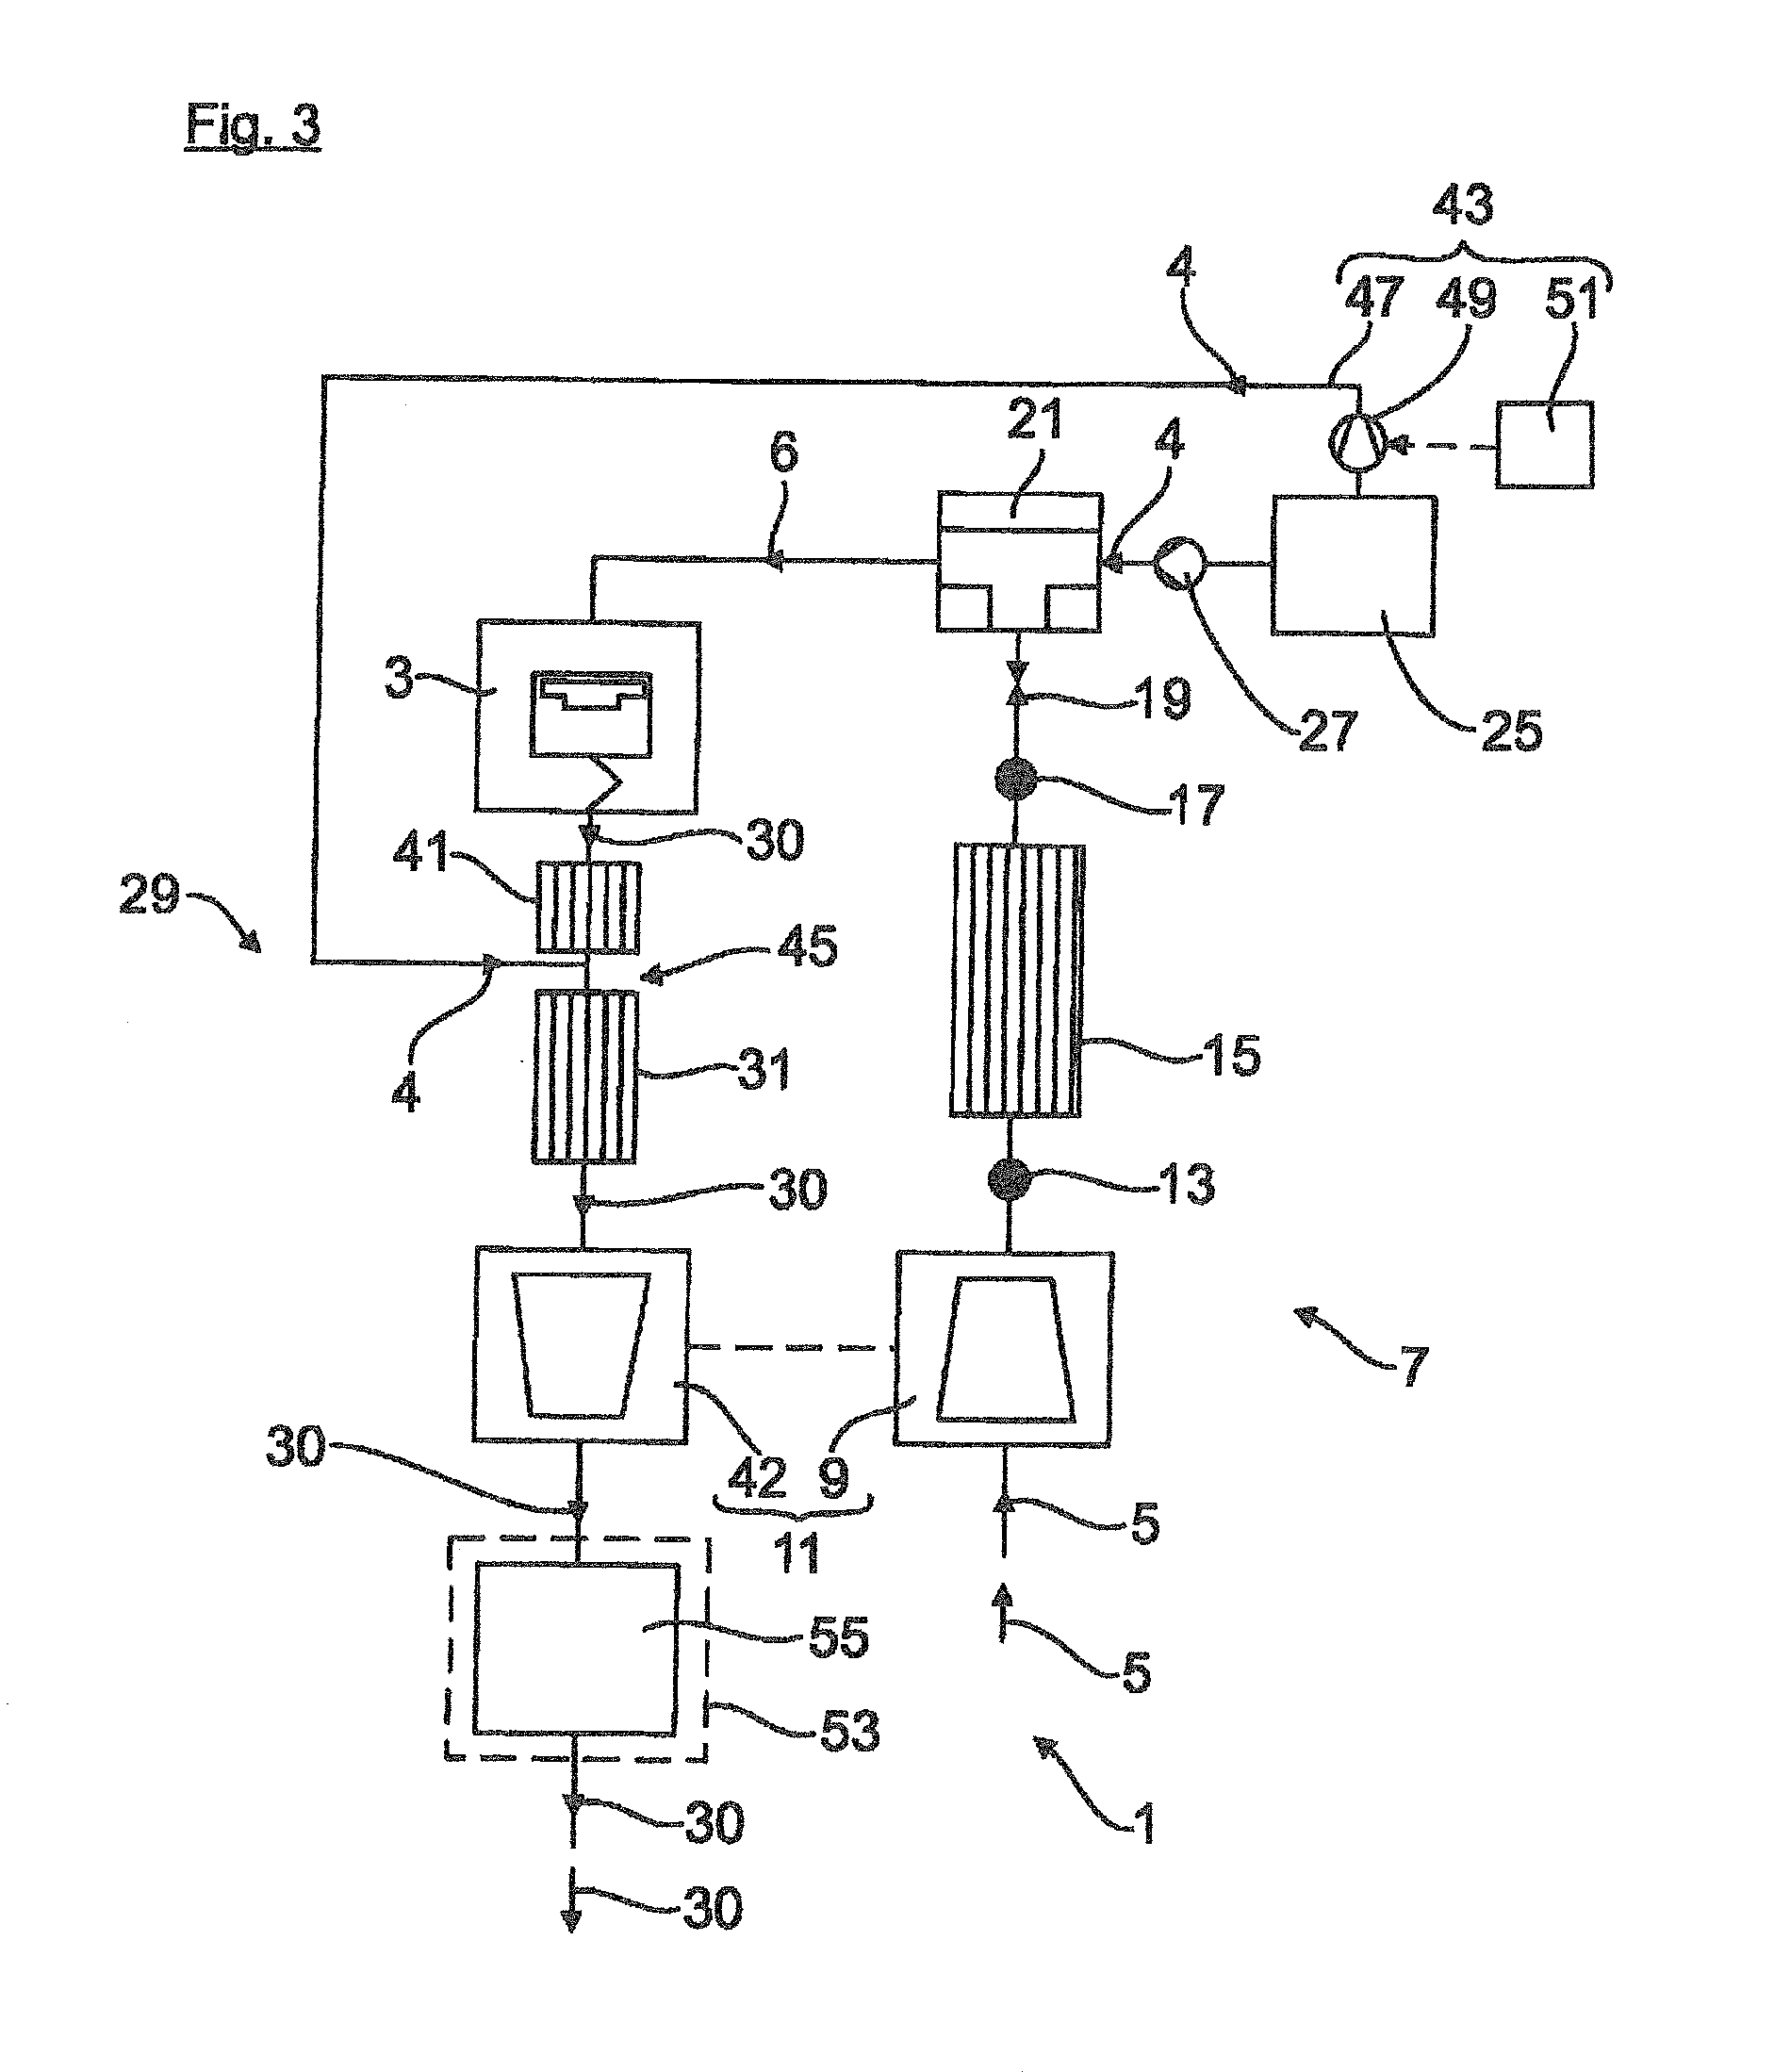 Method for Operating a Gas Engine